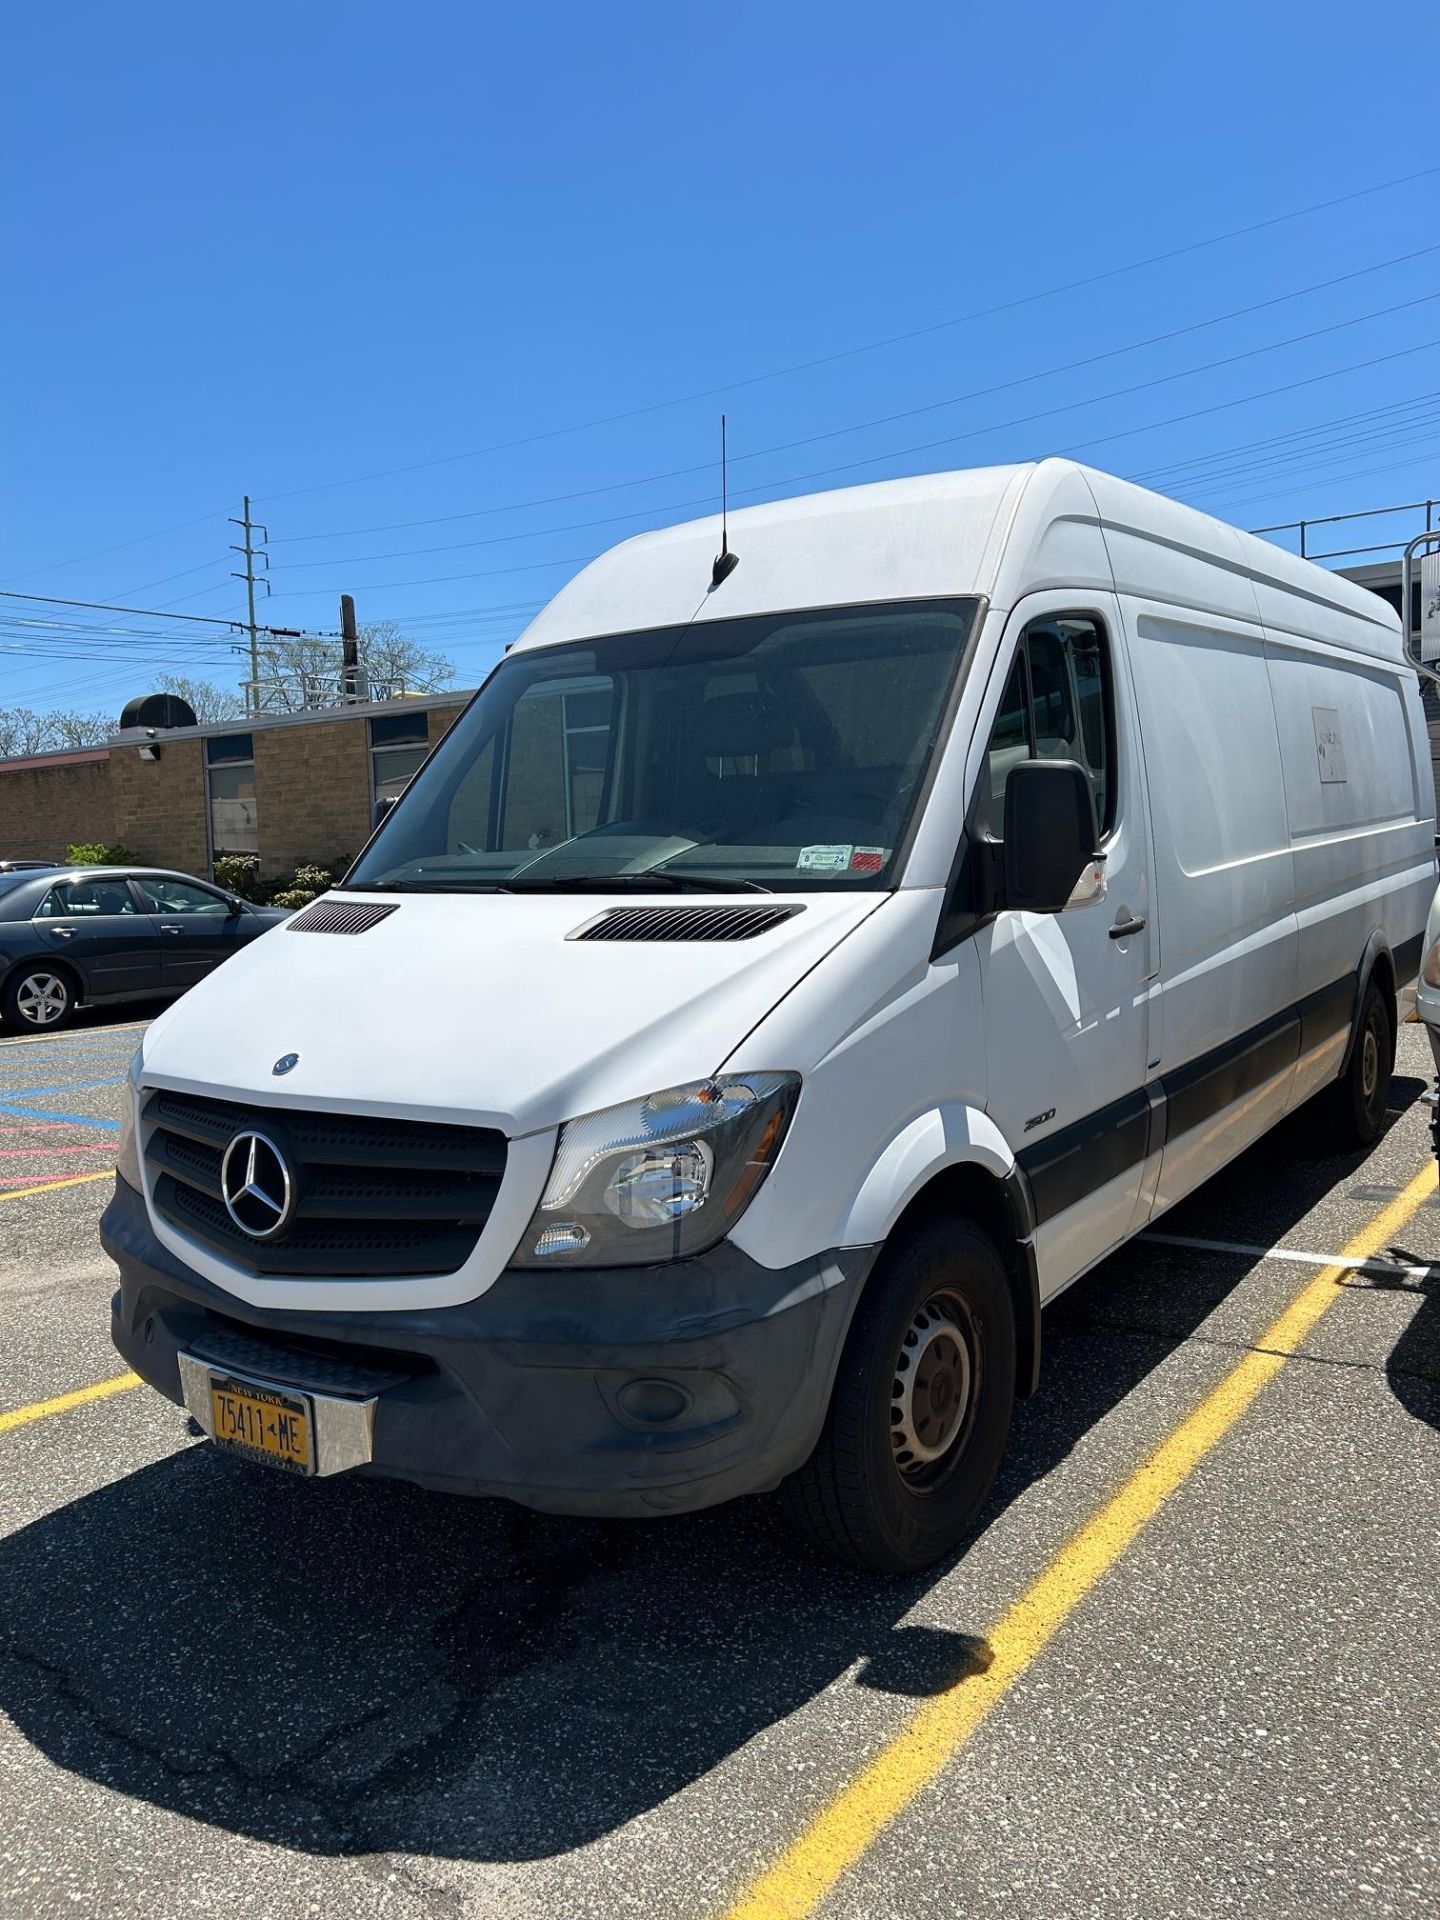 2014 Mercedes Diesel Cargo Van, Automatic Transmission, Approx. 48899 Miles. - Image 2 of 9